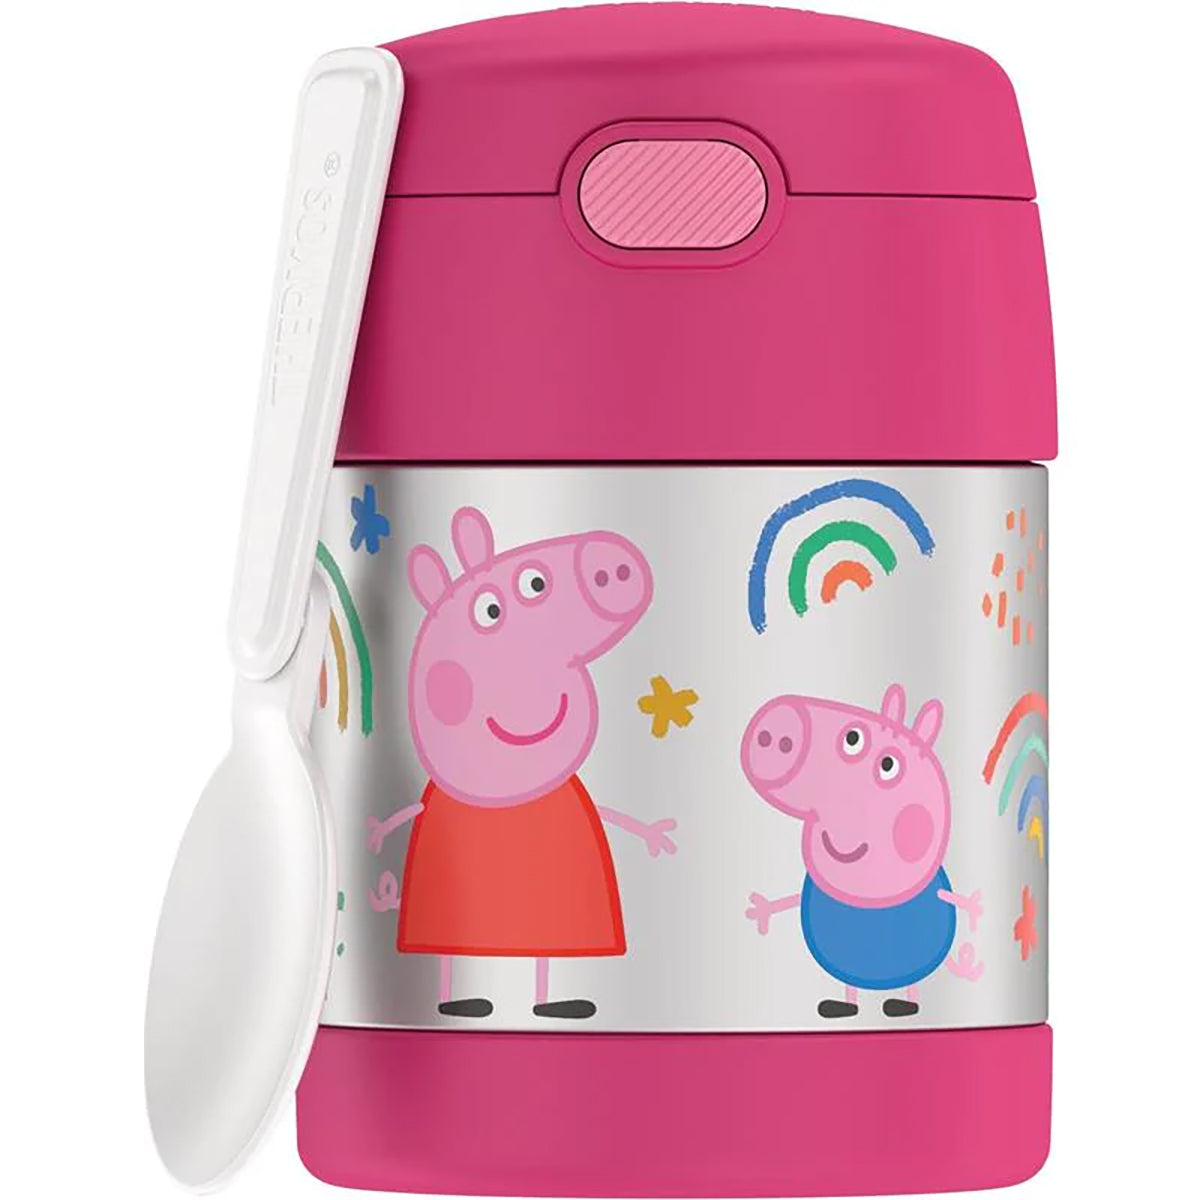 Thermos 10 oz. Kid's Funtainer Stainless Steel Food Jar w/ Spoon - Peppa Pig Thermos